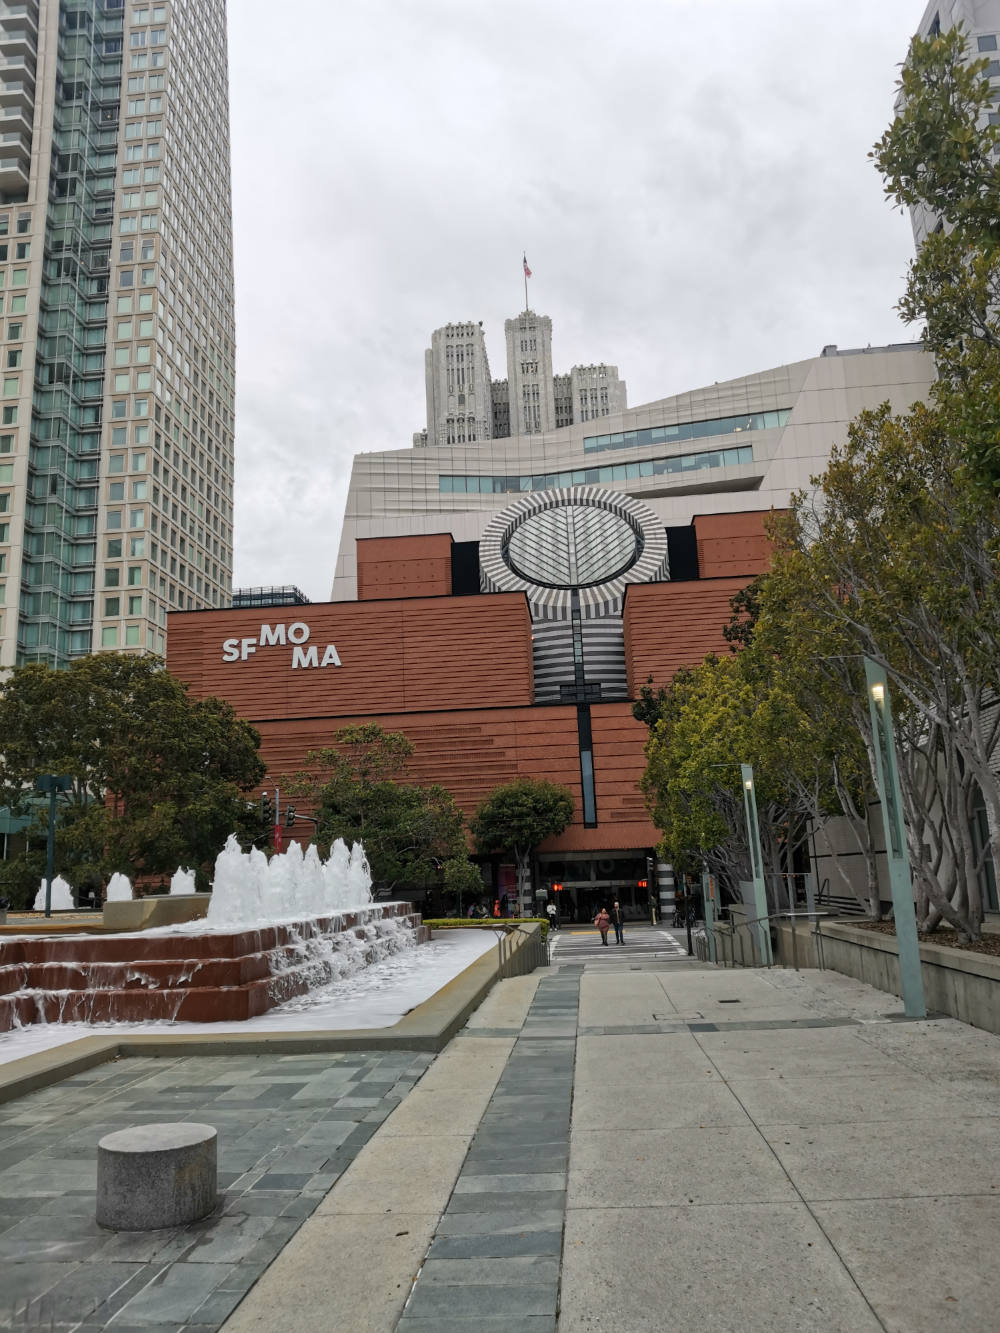 Image: View of the San Francisco Museum of Modern Art, surrounding buildings and fountain.